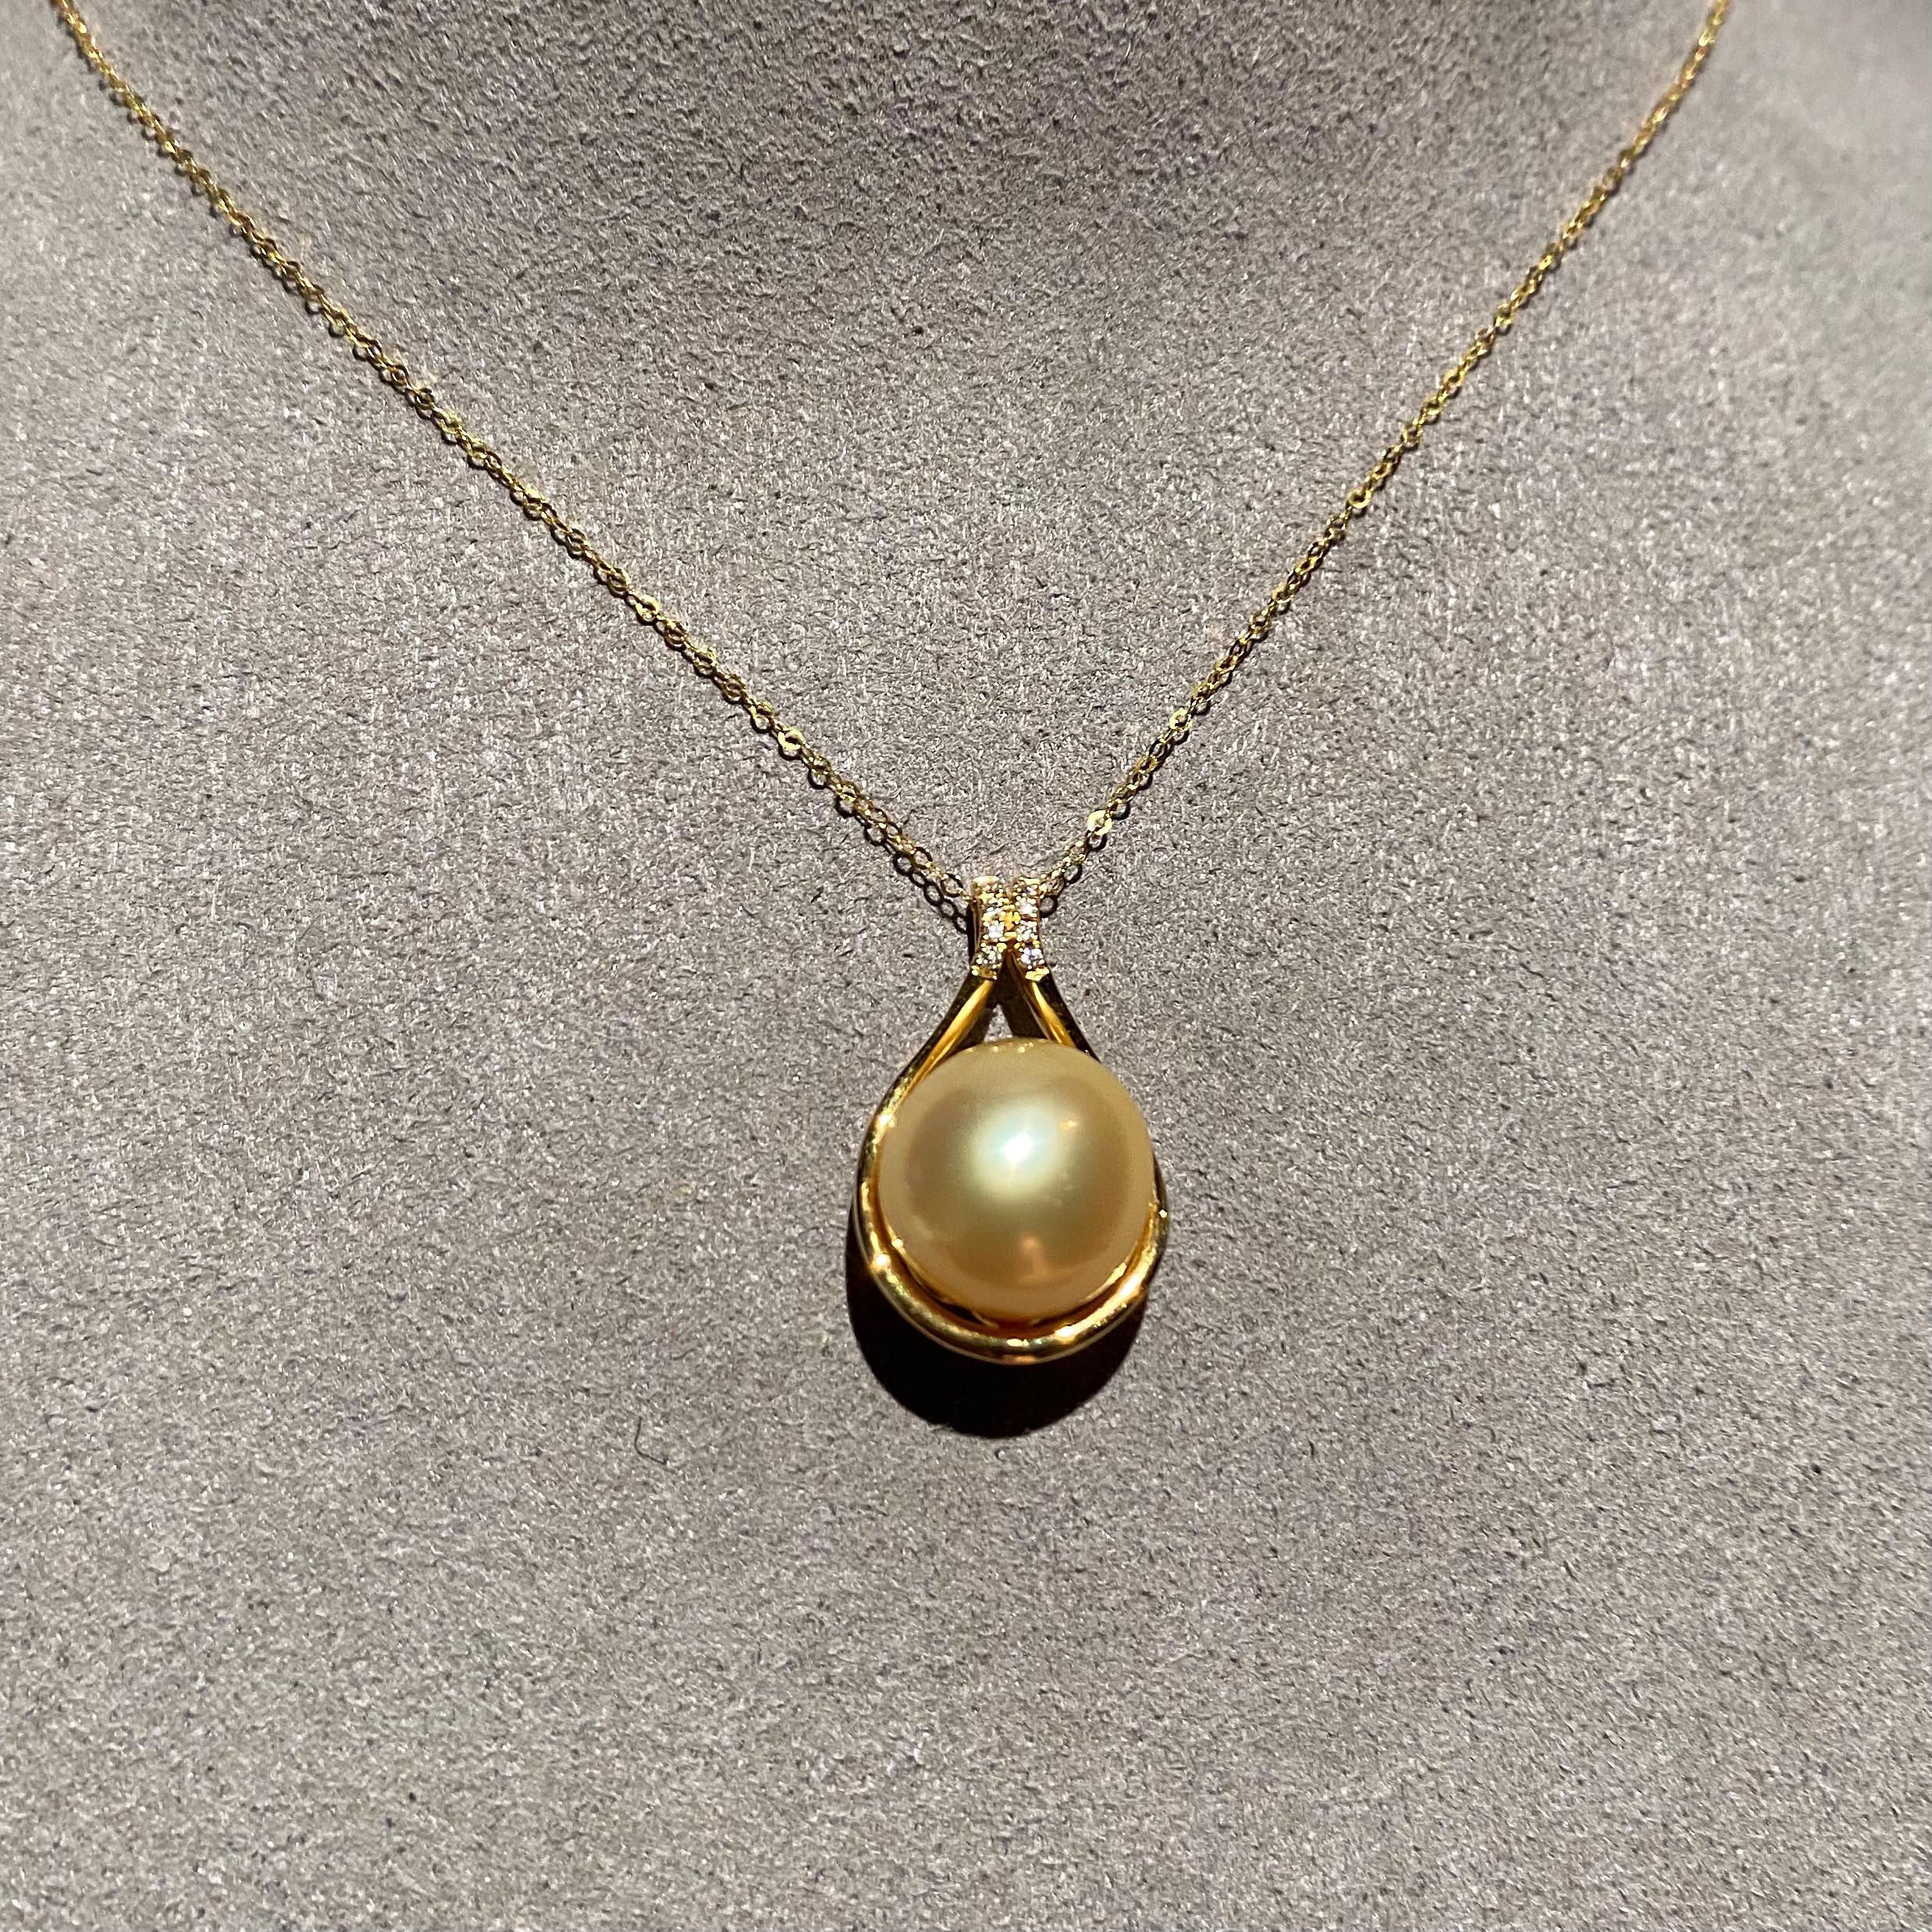 Rain drop shape pendant with diamond bale. The Golden South Sea Pearl is situated at one end of the pendant with Diamond pave bale on the other end. Please note that the chain is not included, this price is for the Pearl pendant only.

The Golden